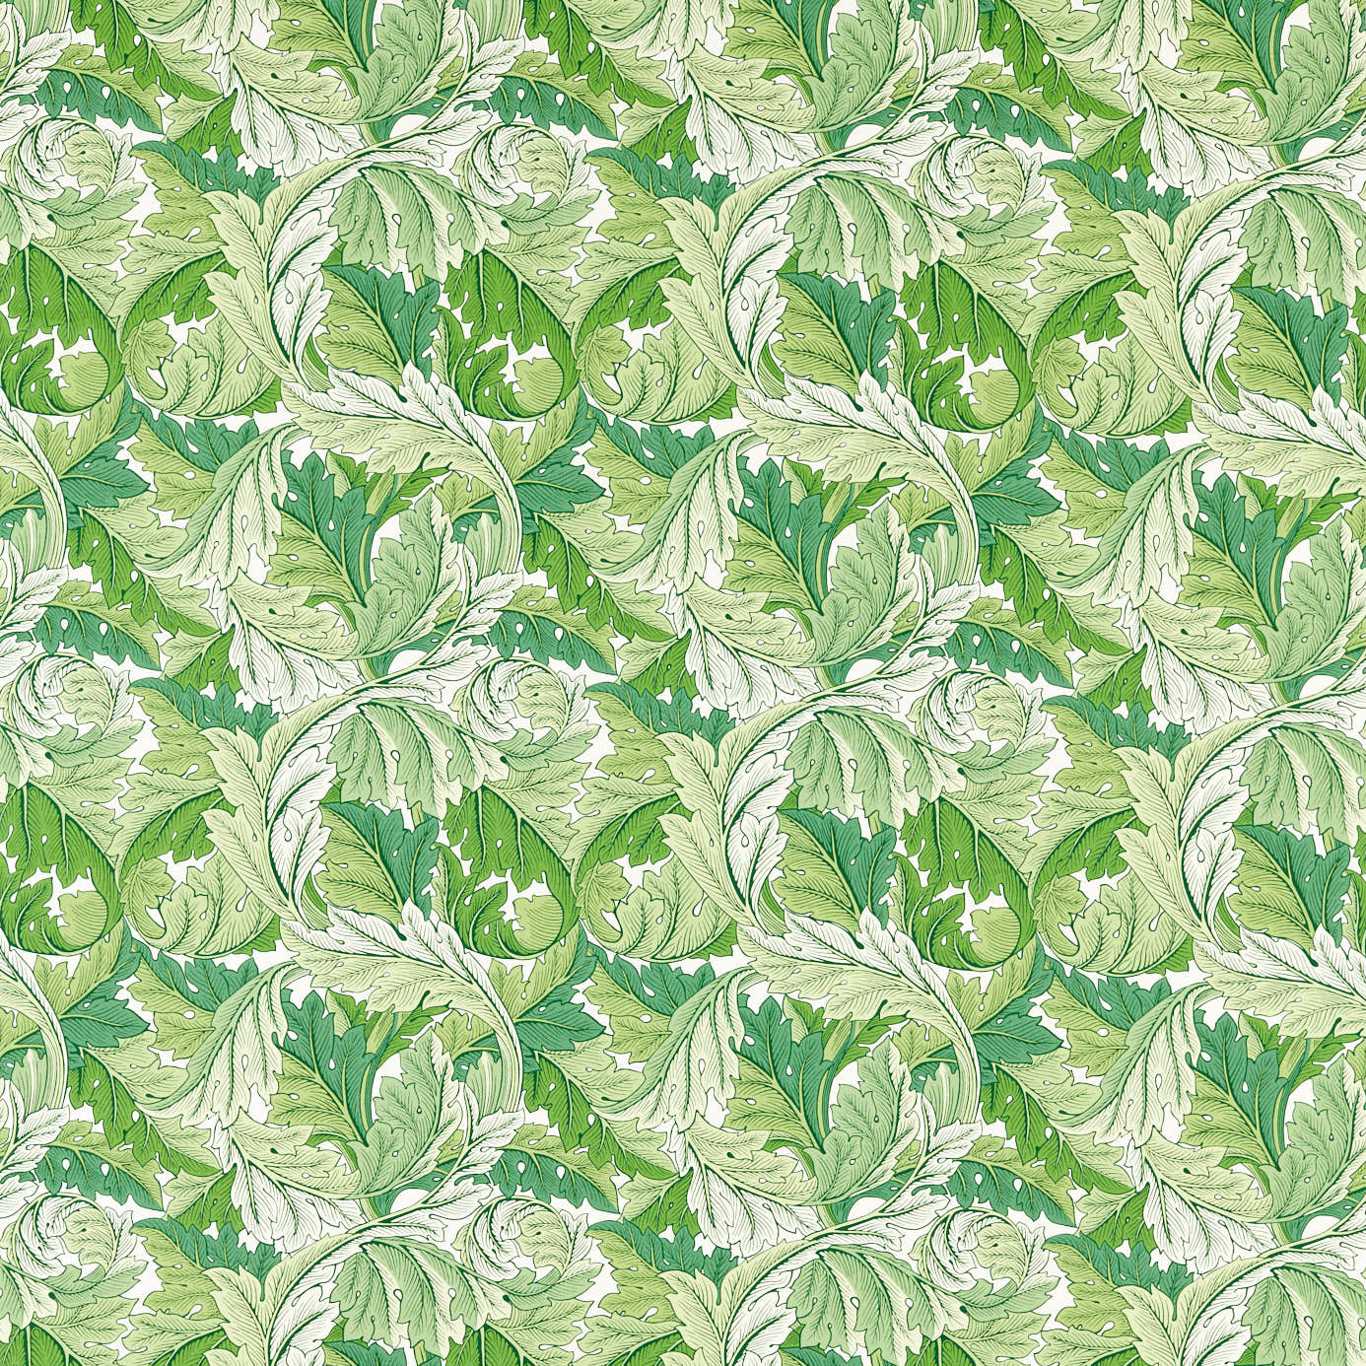 Acanthus Fabric by Morris & Co. - MSIM226896 - Leaf Green